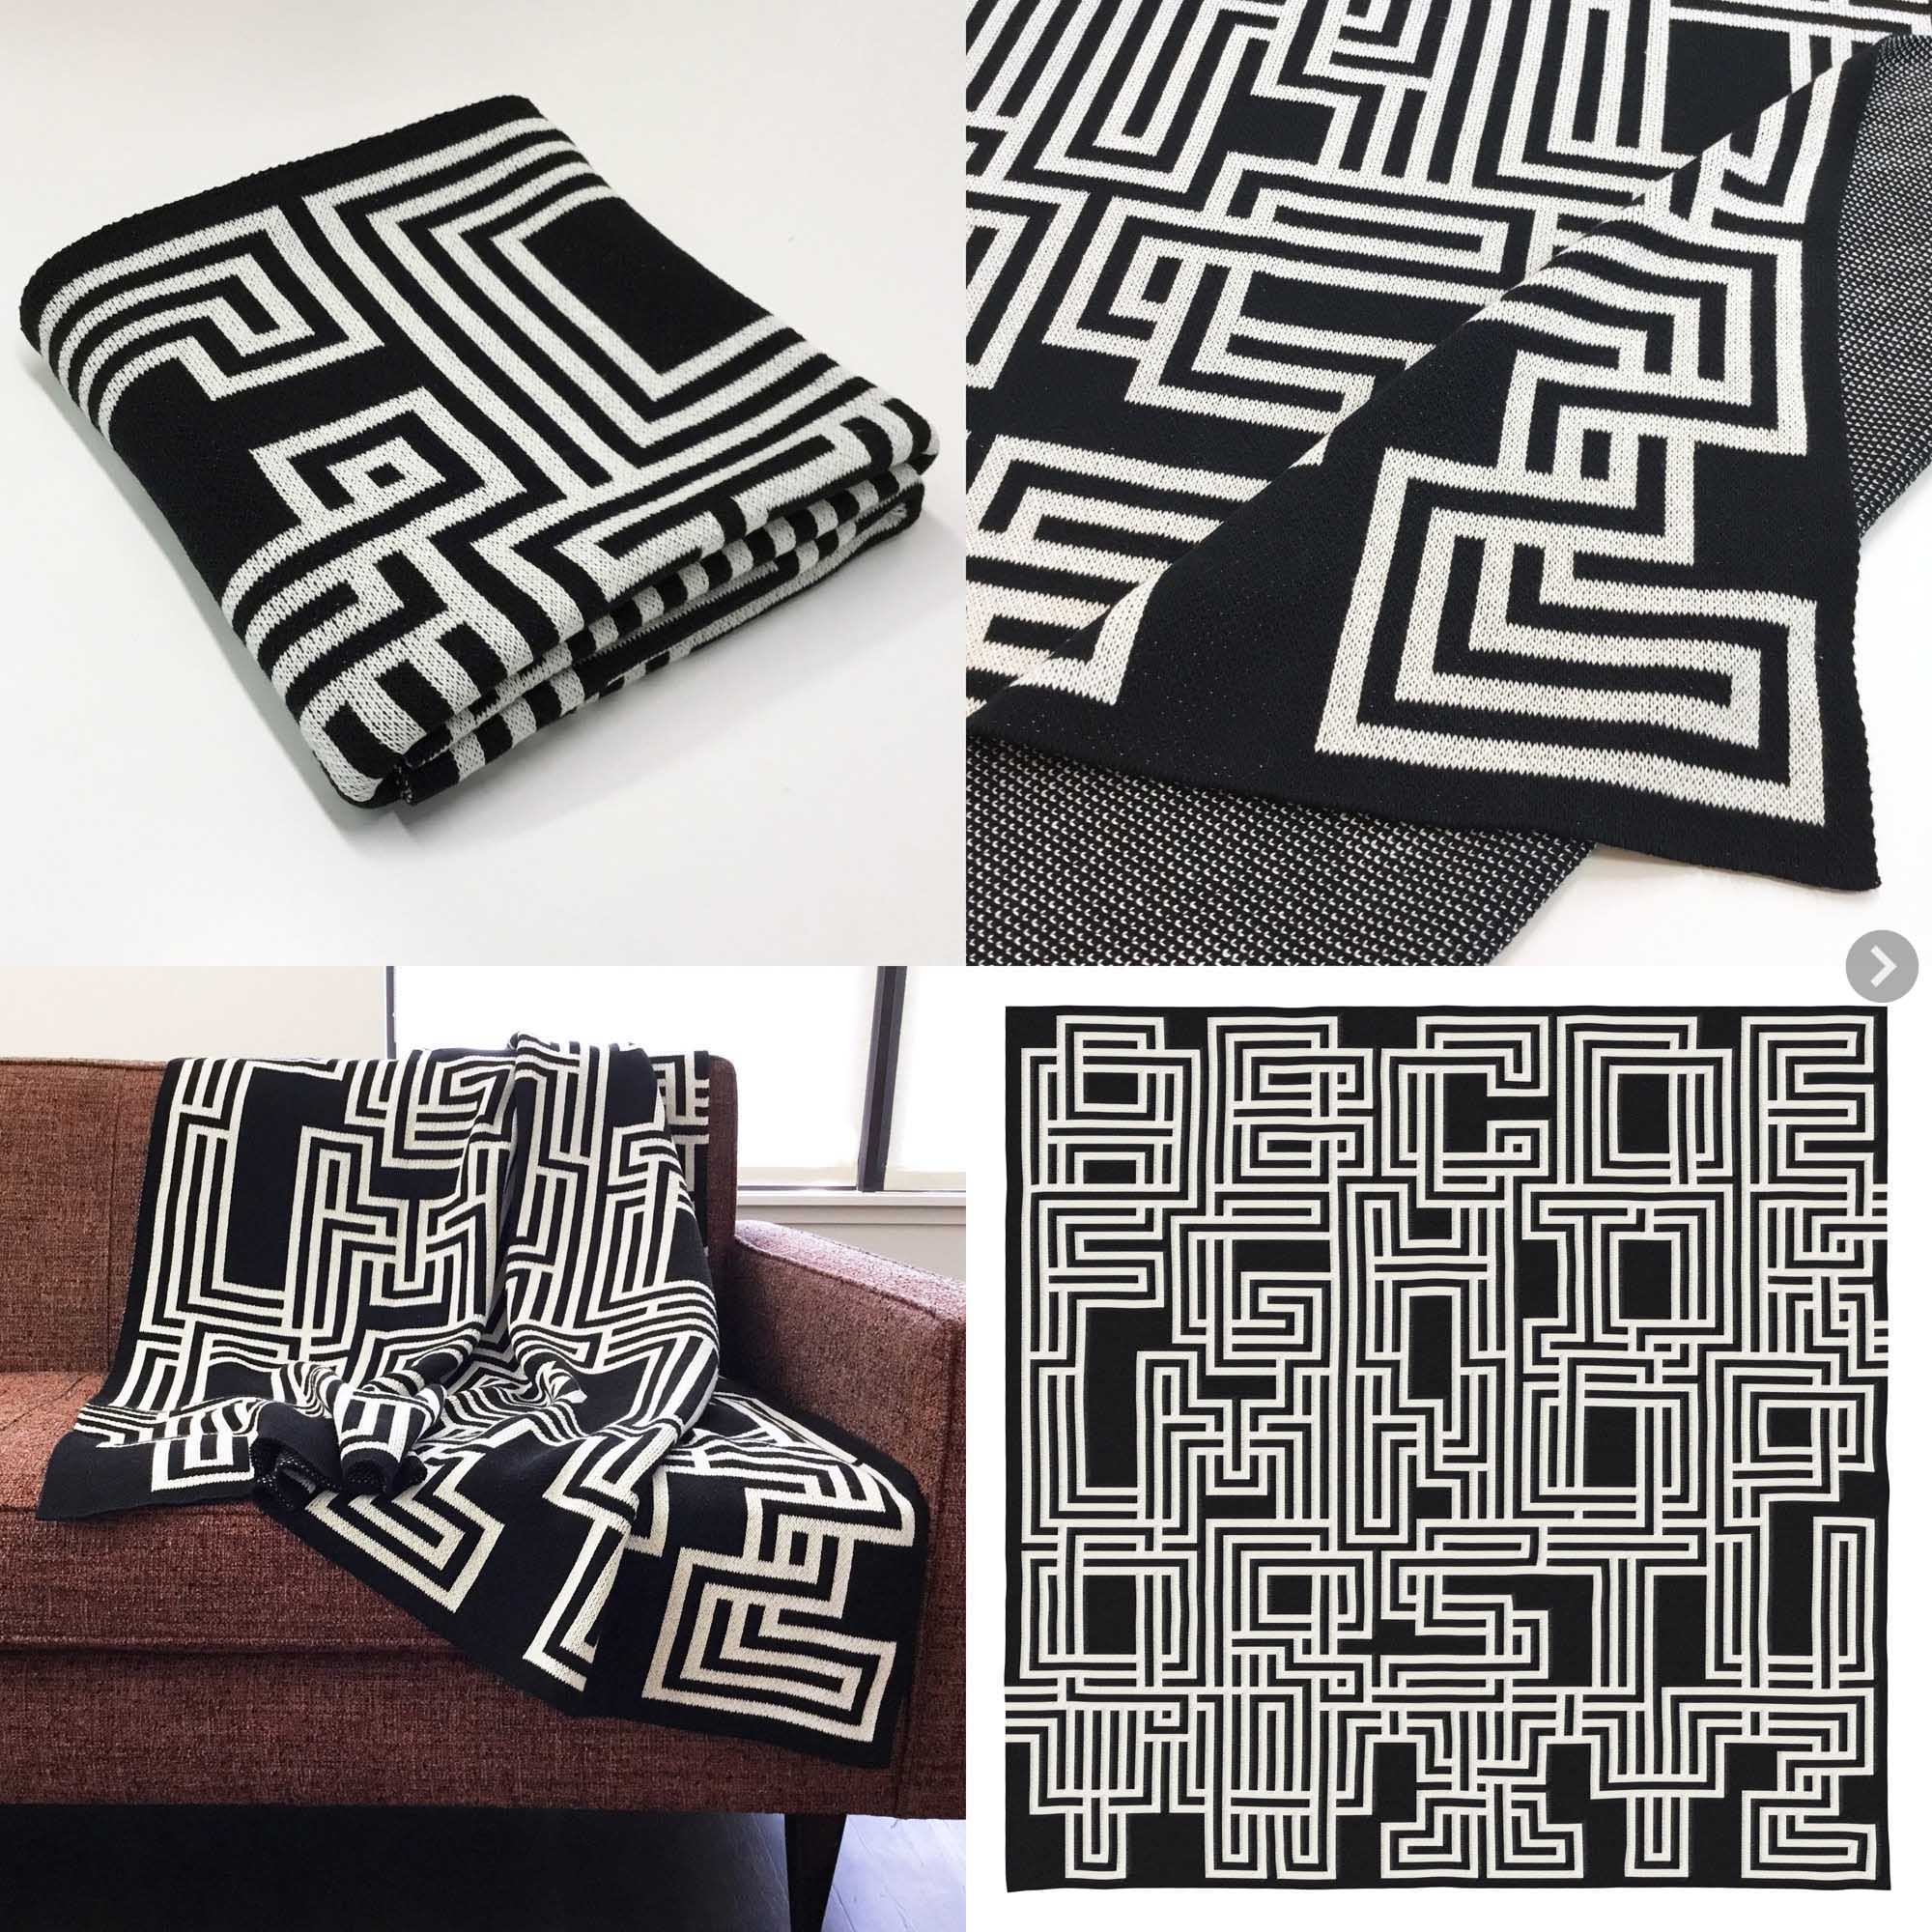 Abstract geometric pattterns, custom woven on a jacquard loom, create this modern woven textile decor. 12 x 12 inches to 18 x 18 inches.